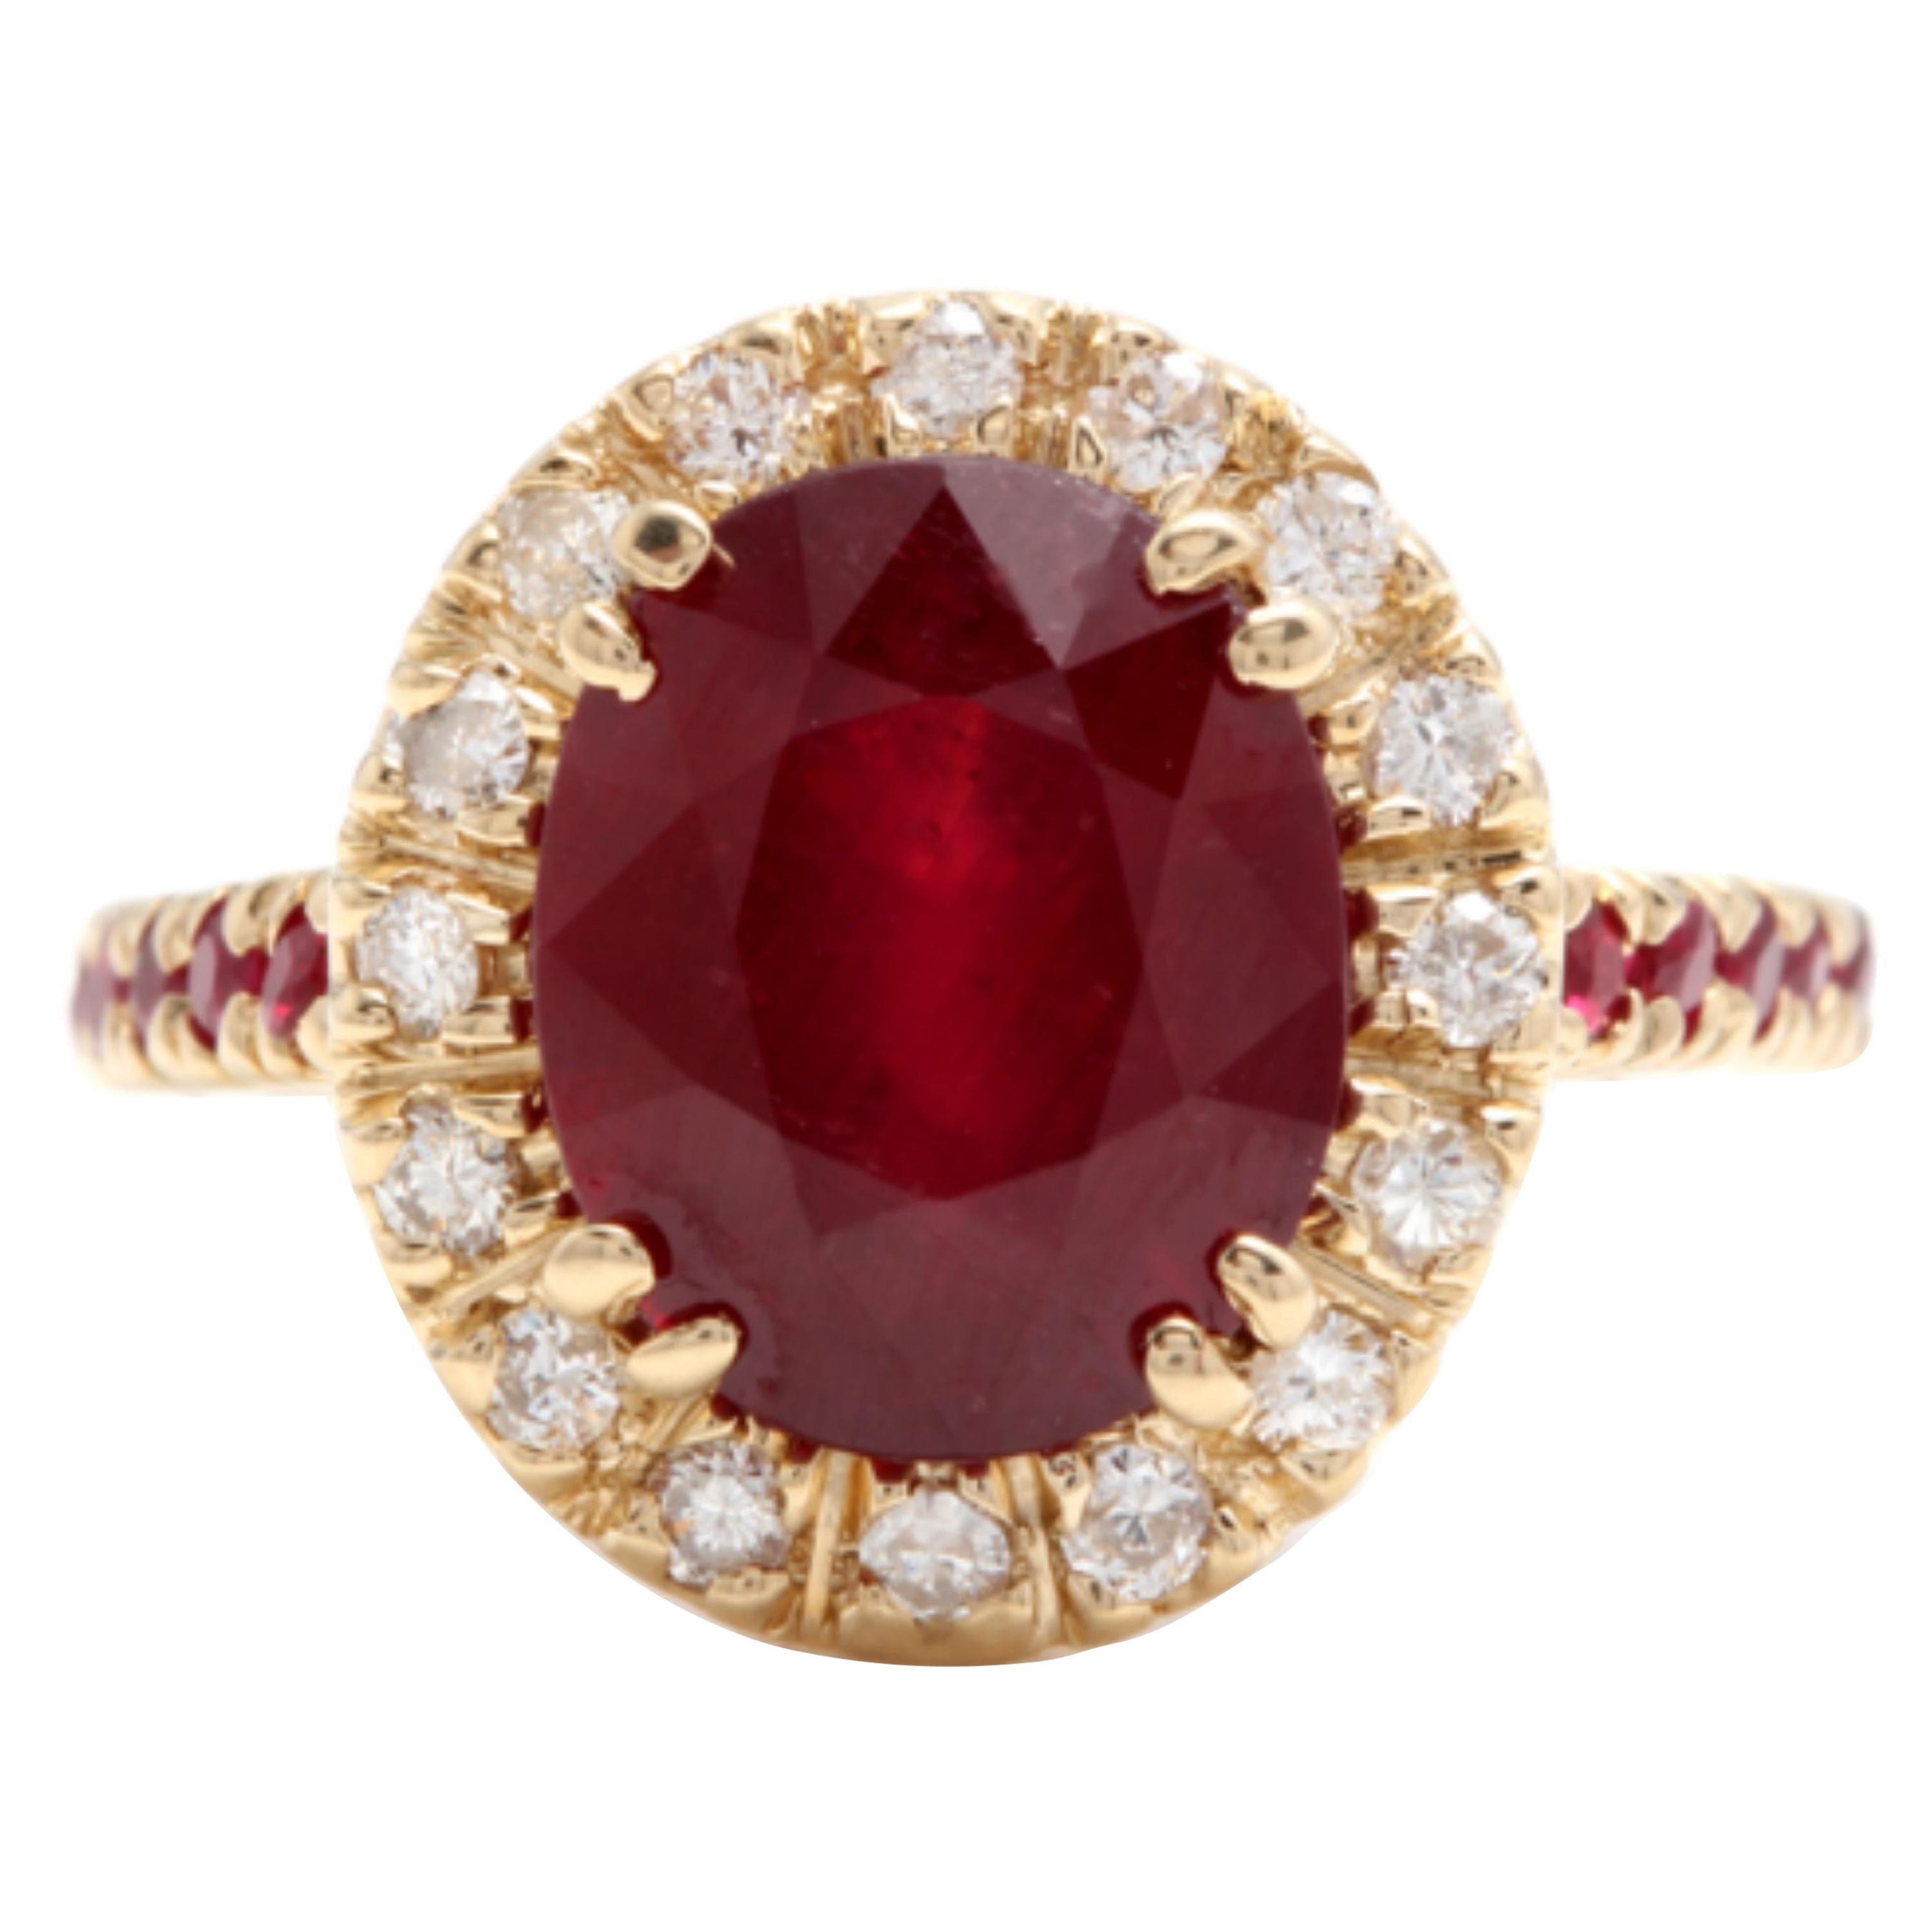 5.60 Carat Gorgeous Natural Red Ruby and Diamond 14 Karat Solid Yellow Gold Ring